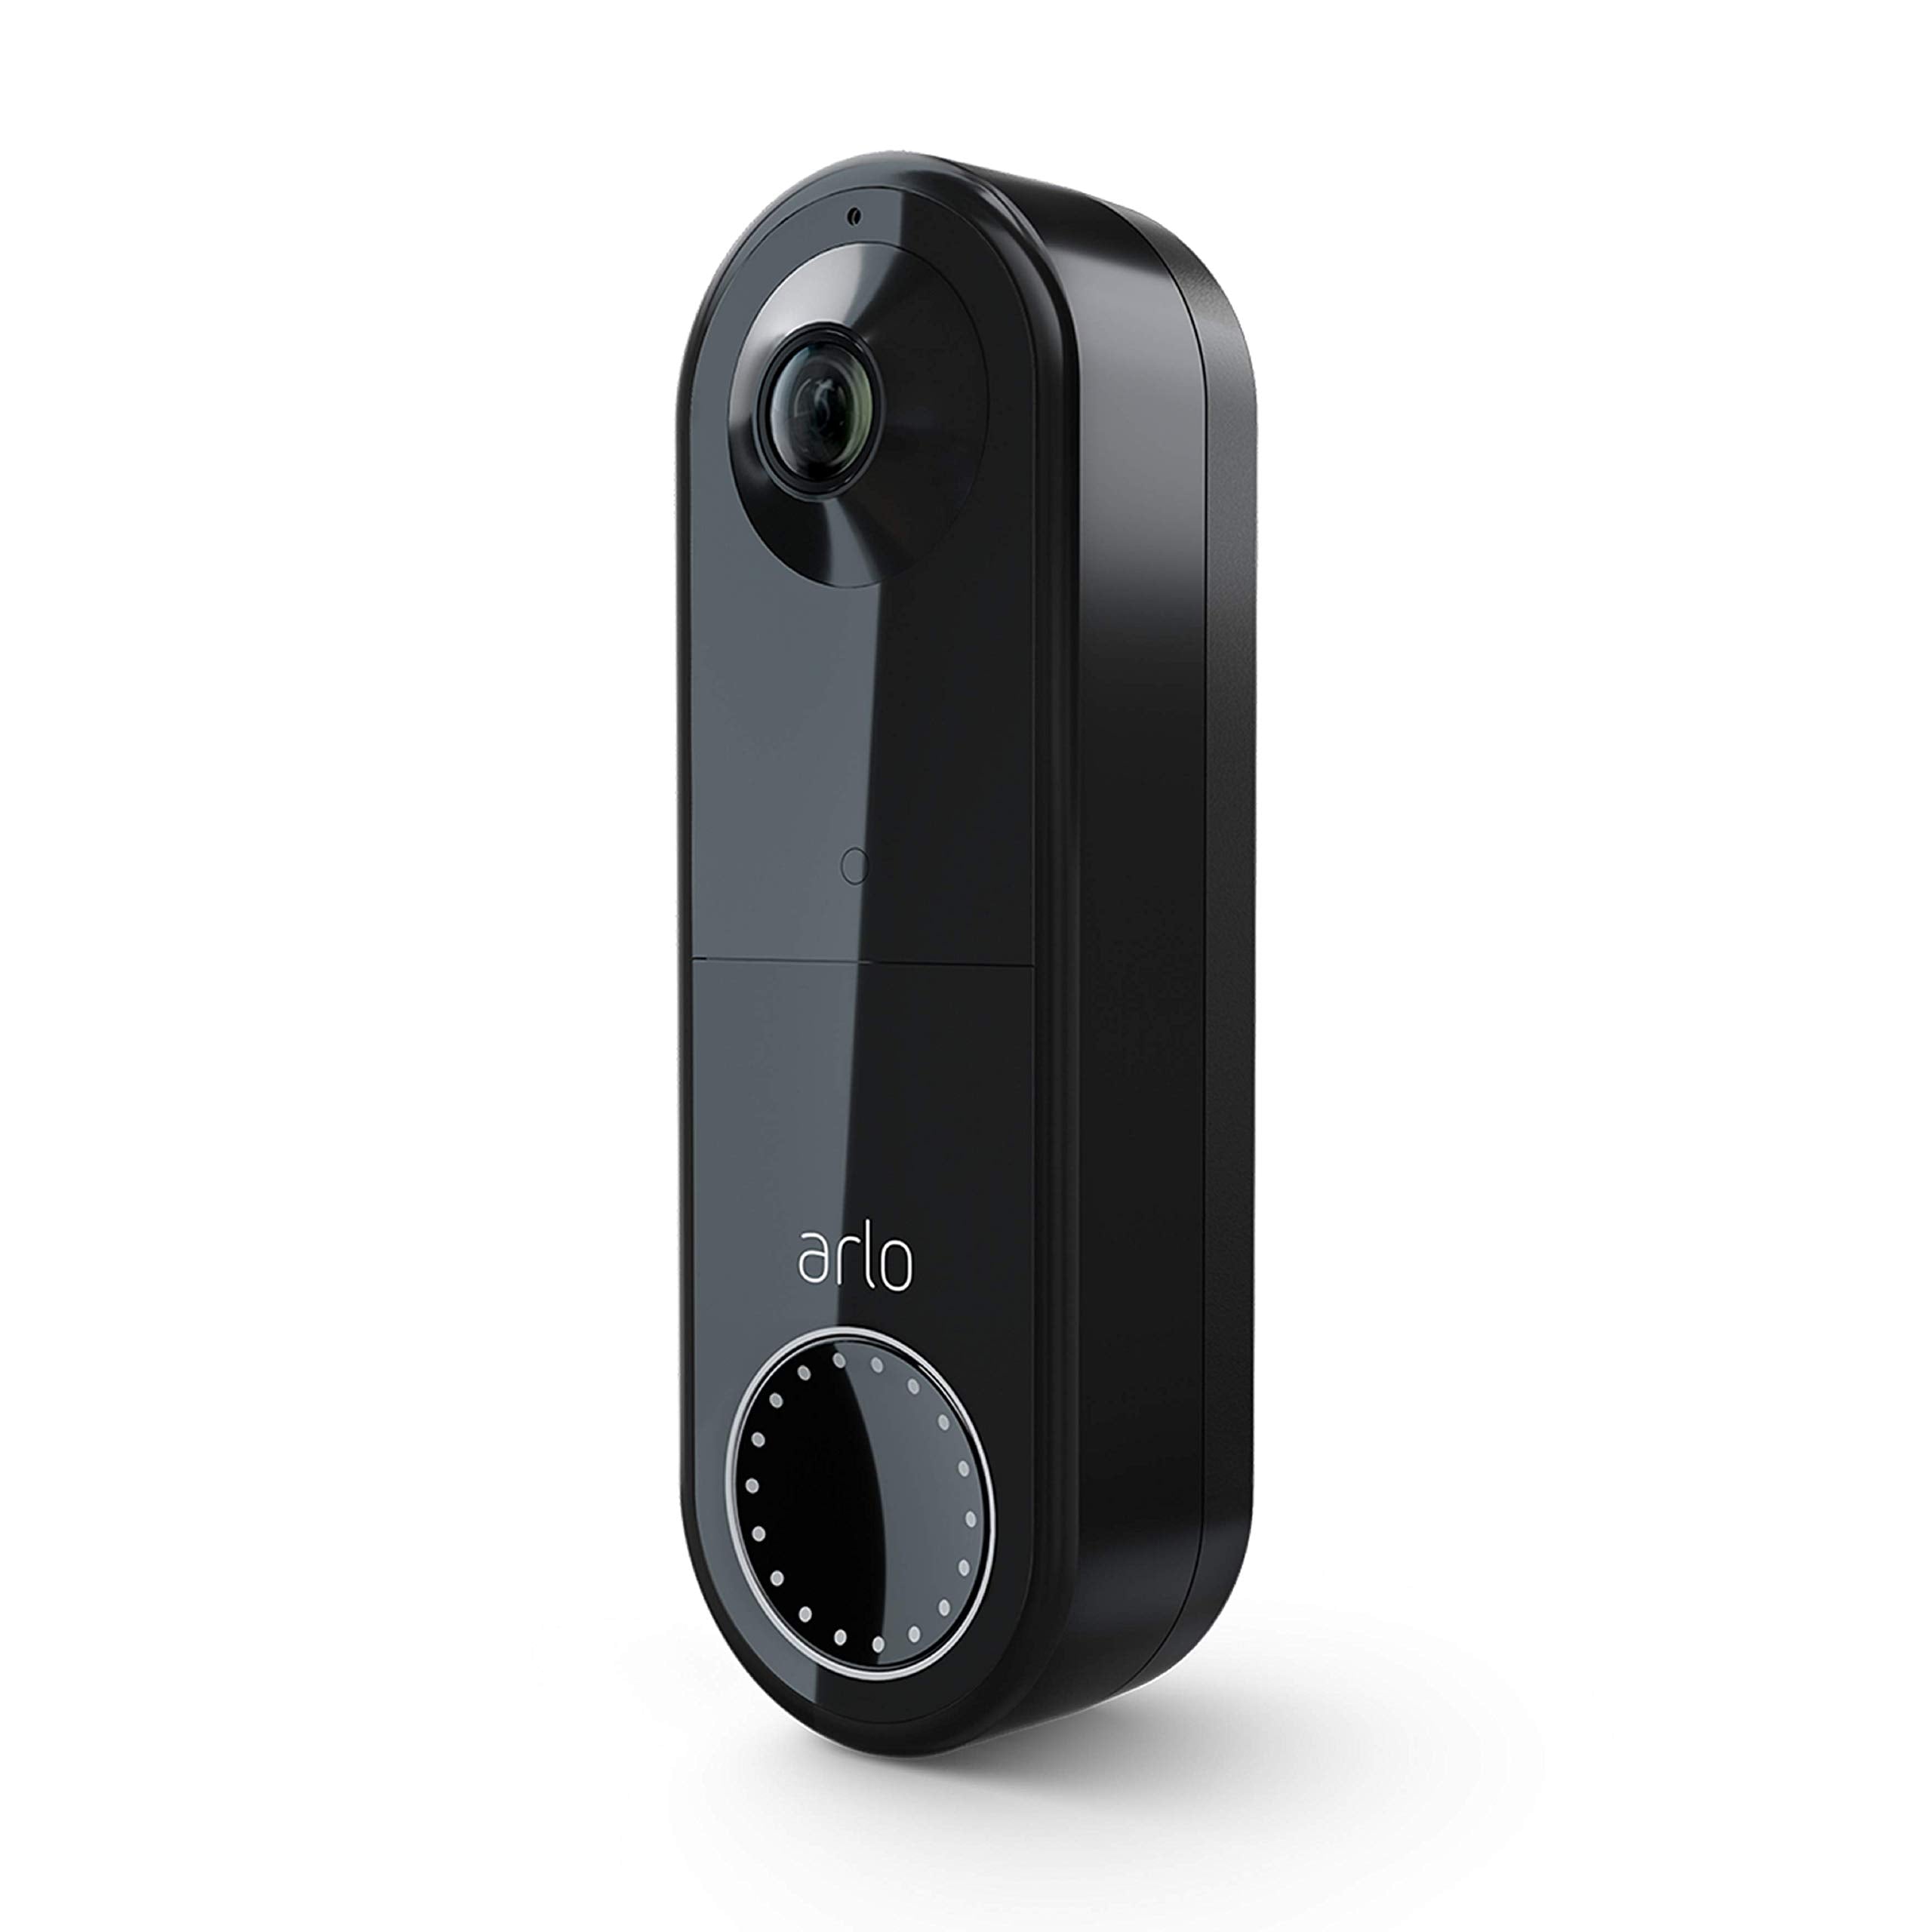 Arlo Essential wire-free Video Doorbell Security Camera, 1080p HD doorbell camera HD, 2-Way Audio, Package Detection, Motion Detection and Alerts, Built-in Siren, Night Vision, AVD2001B, Black